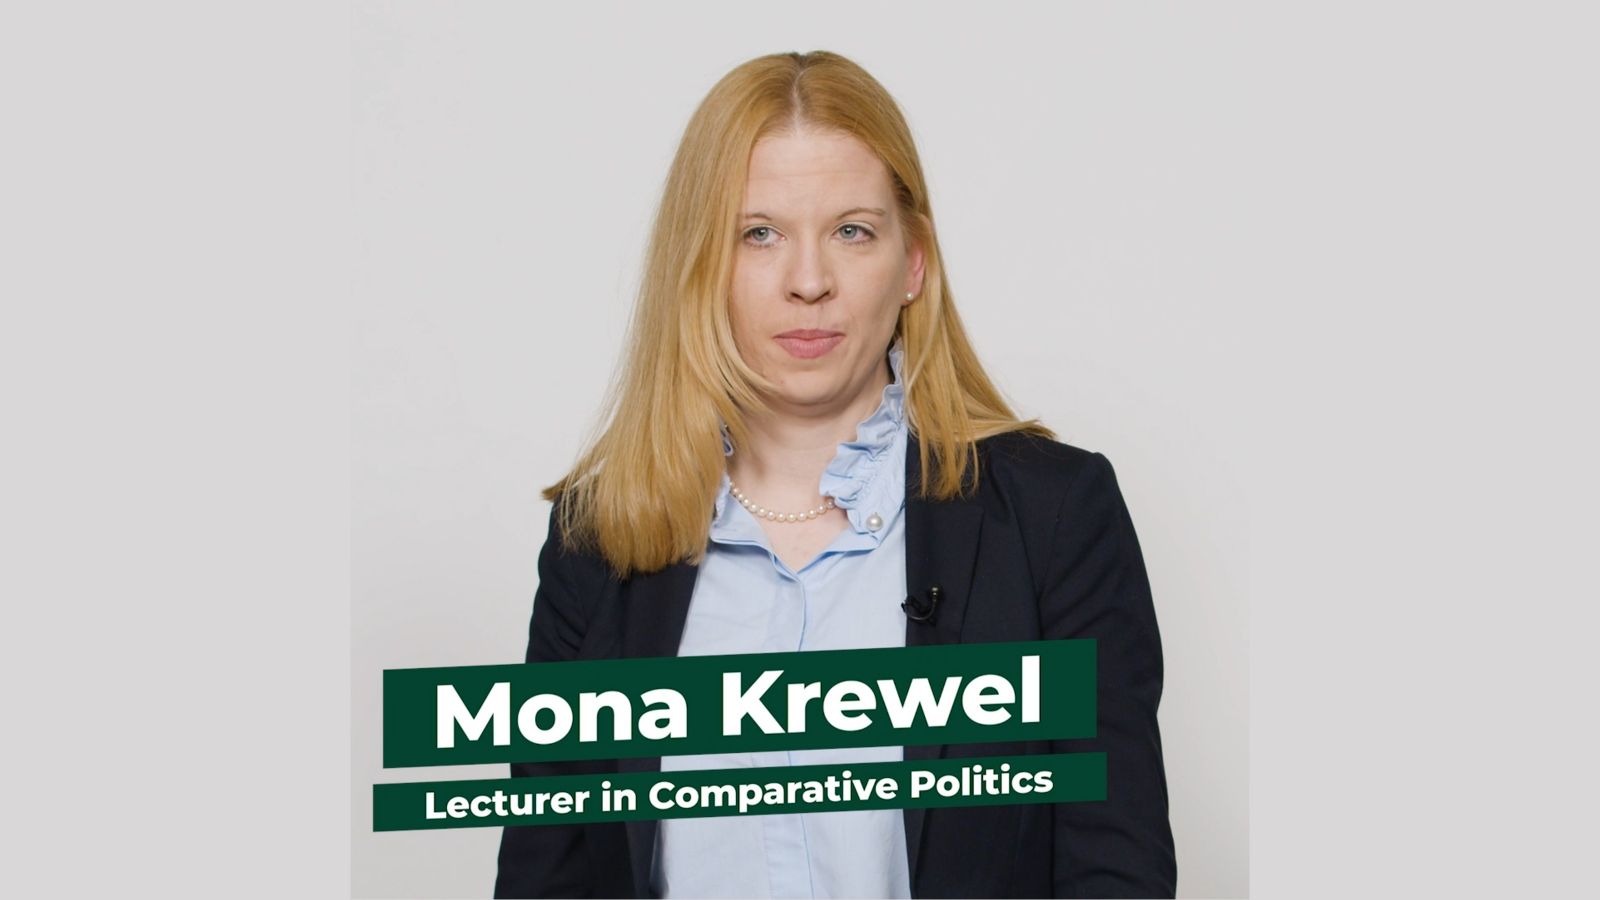 Lecturer in Comparative Politics Mona Krewel stands facing the camera against a white backdrop